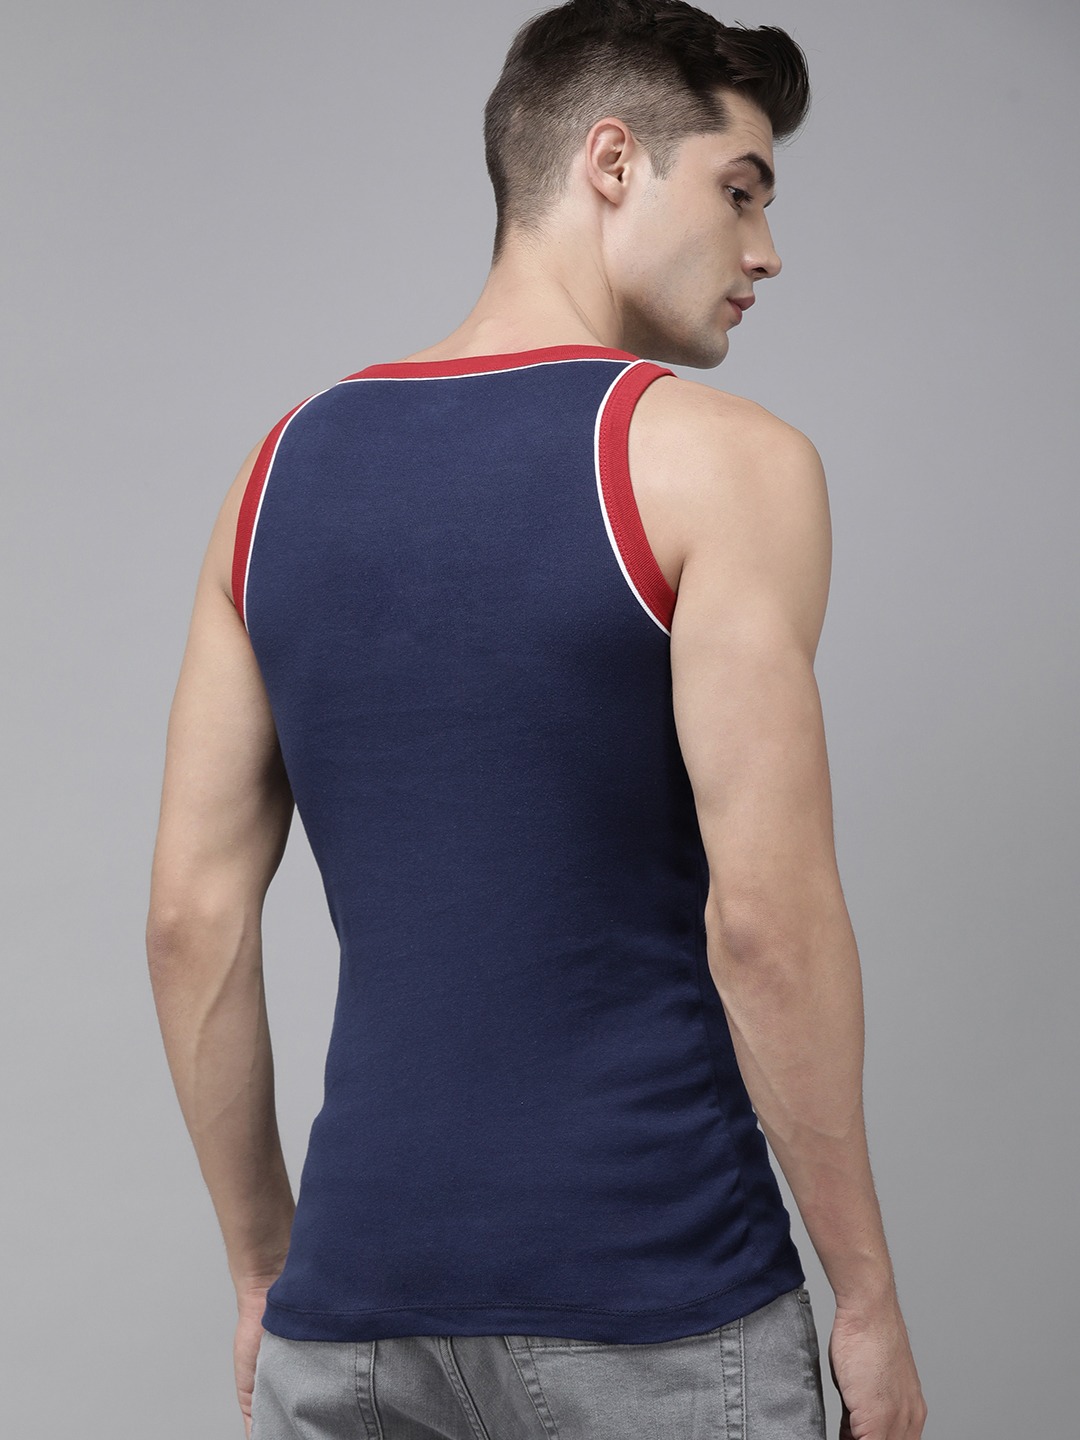 Clothing Innerwear Vests | Roadster Men Pack of 2 Solid Pure Cotton Innerwear Vests - MW89386